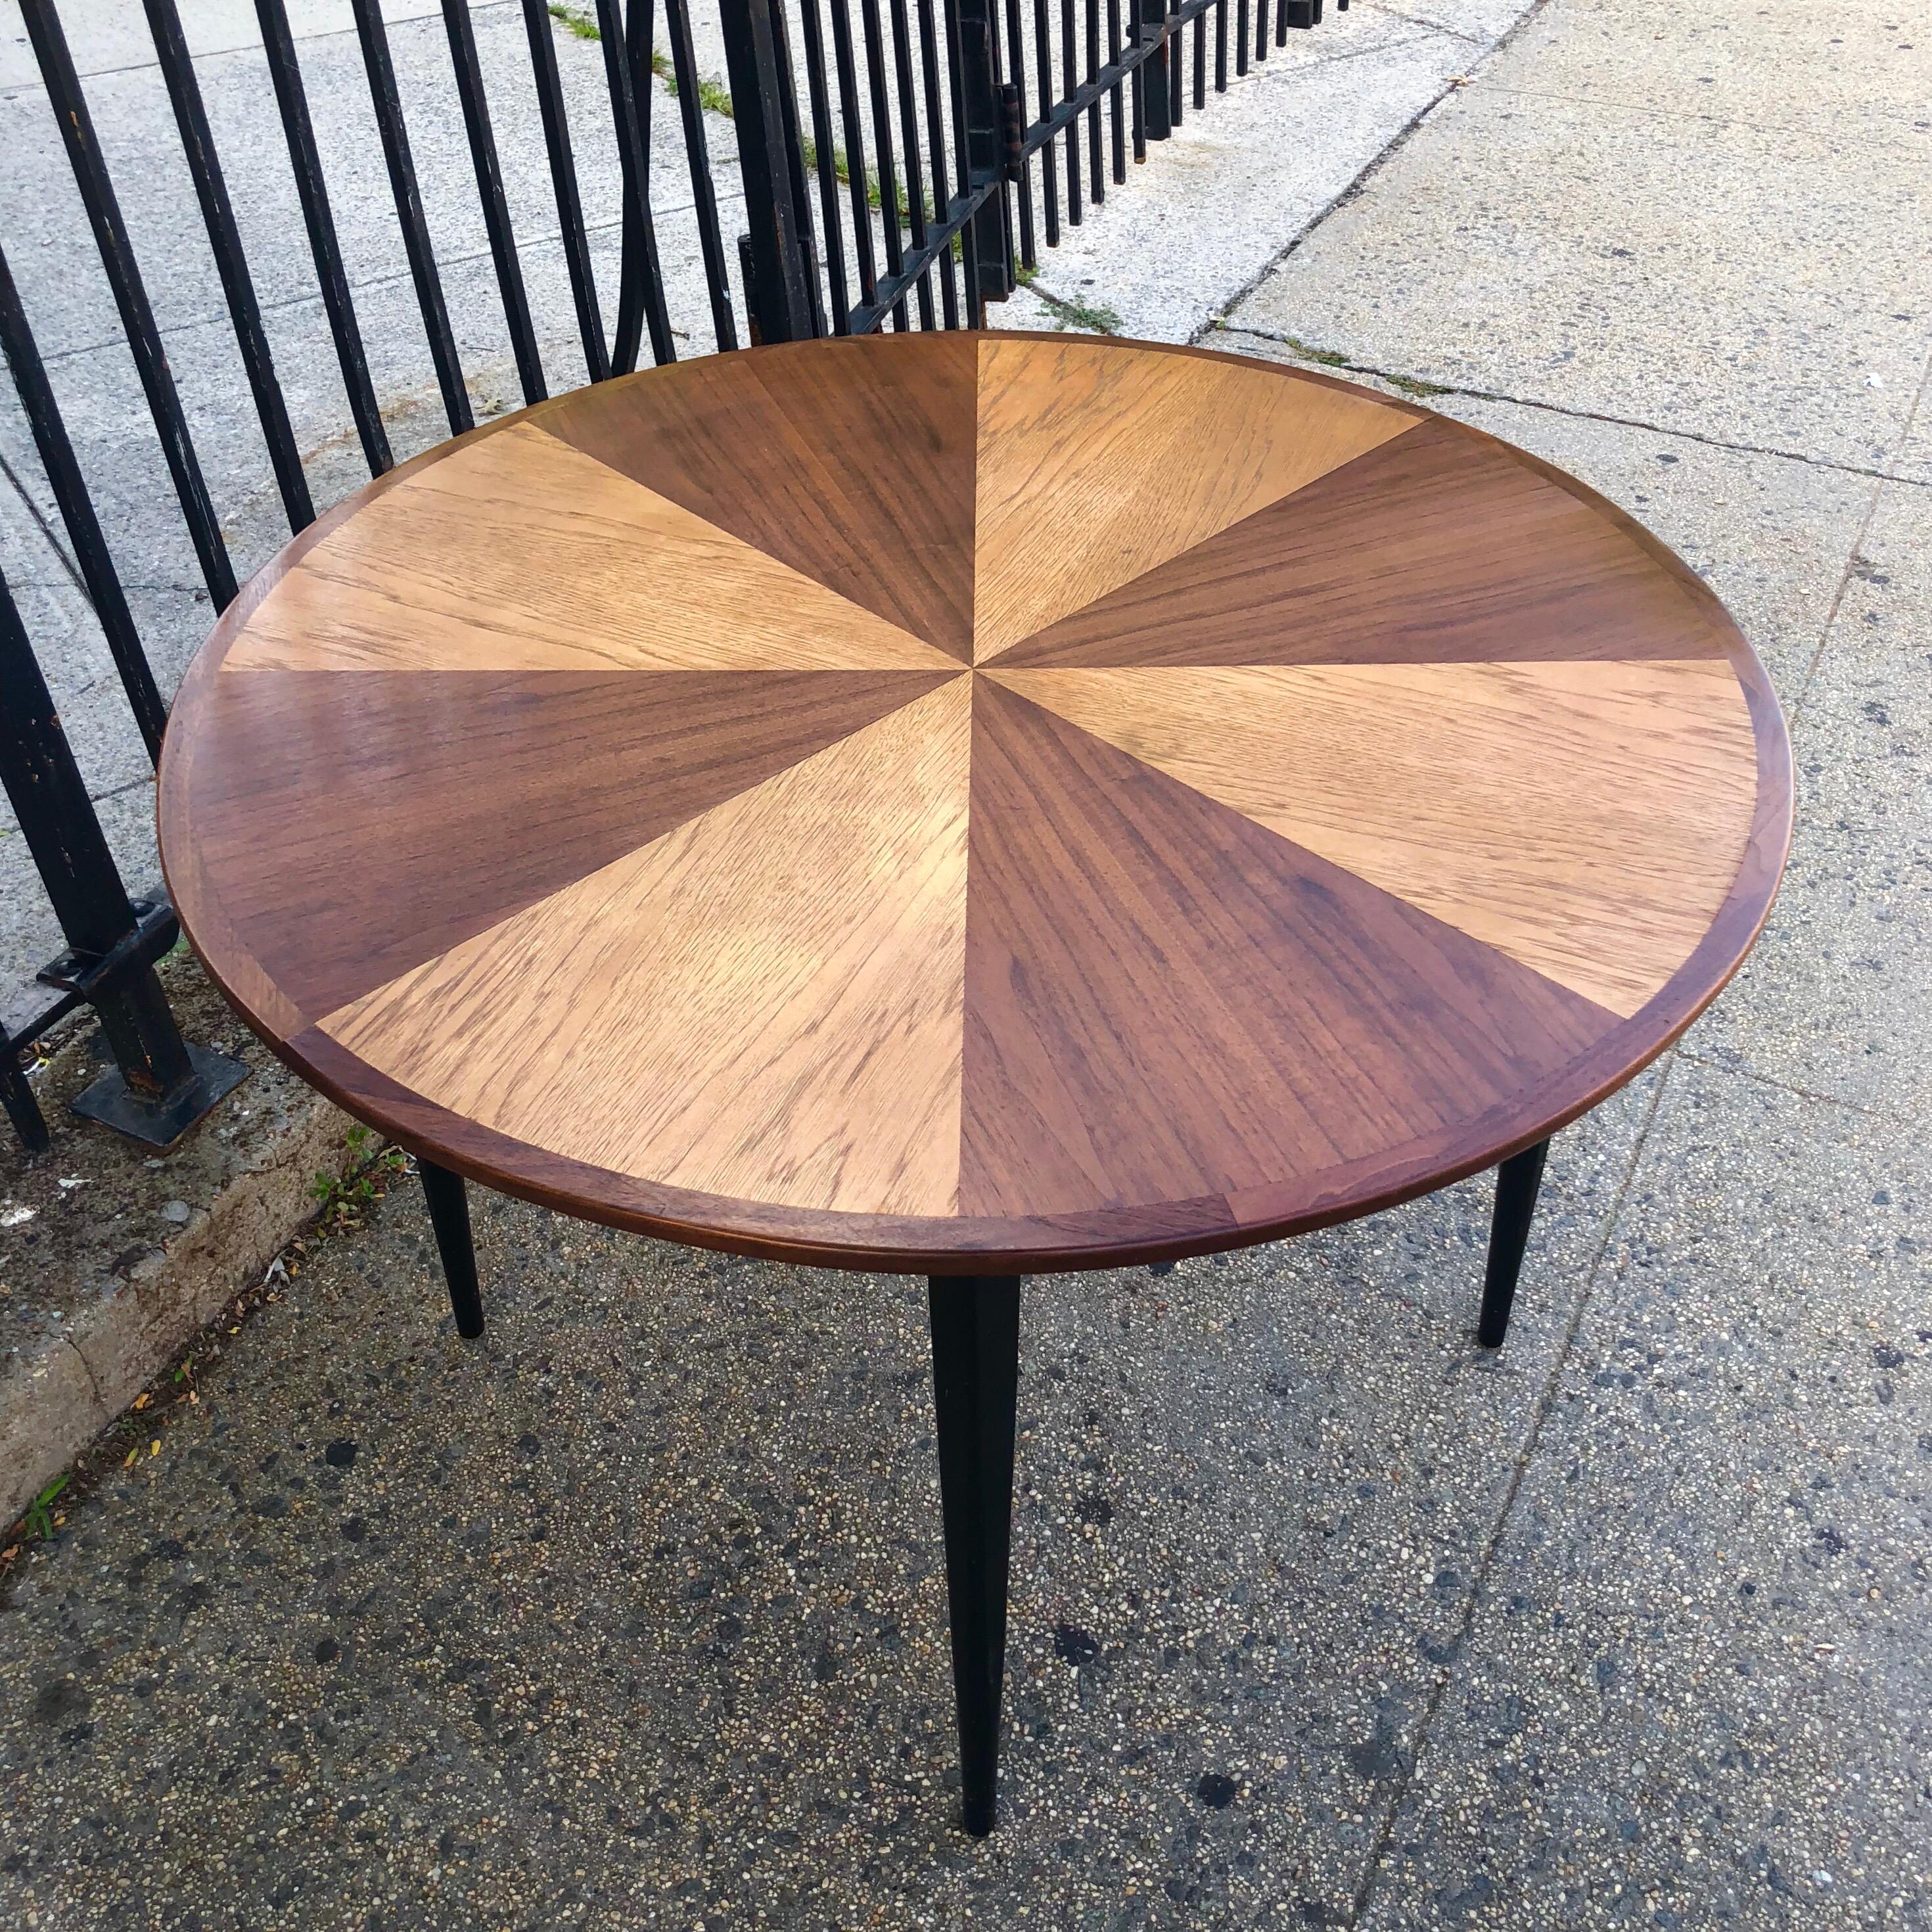 Danish modern dining table in alternative pinwheel pattern of ash and walnut finishes. Wood has been freshly oiled. Very sturdy and solid. 45 inches in diameter and expandable (does not include leaves). Comfortably fits four standard dining chairs.